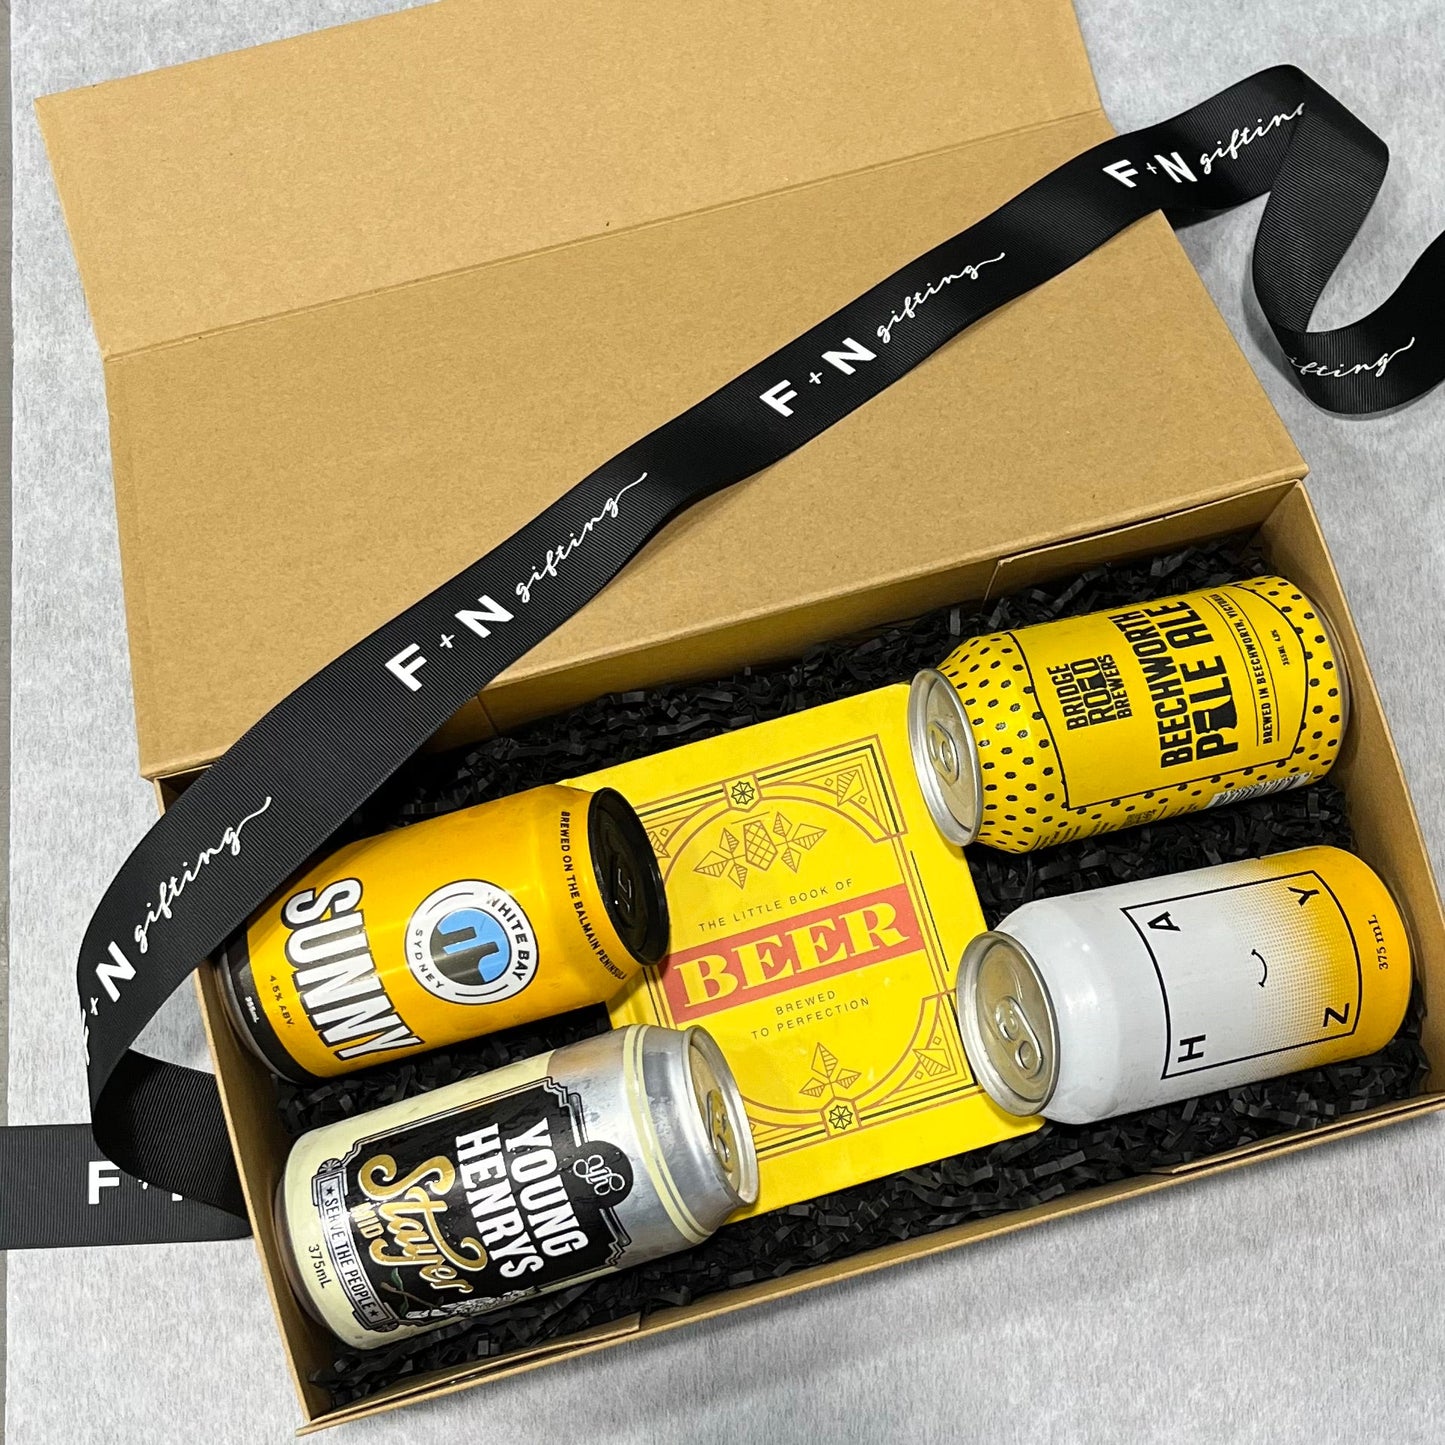 All About Beer Box!